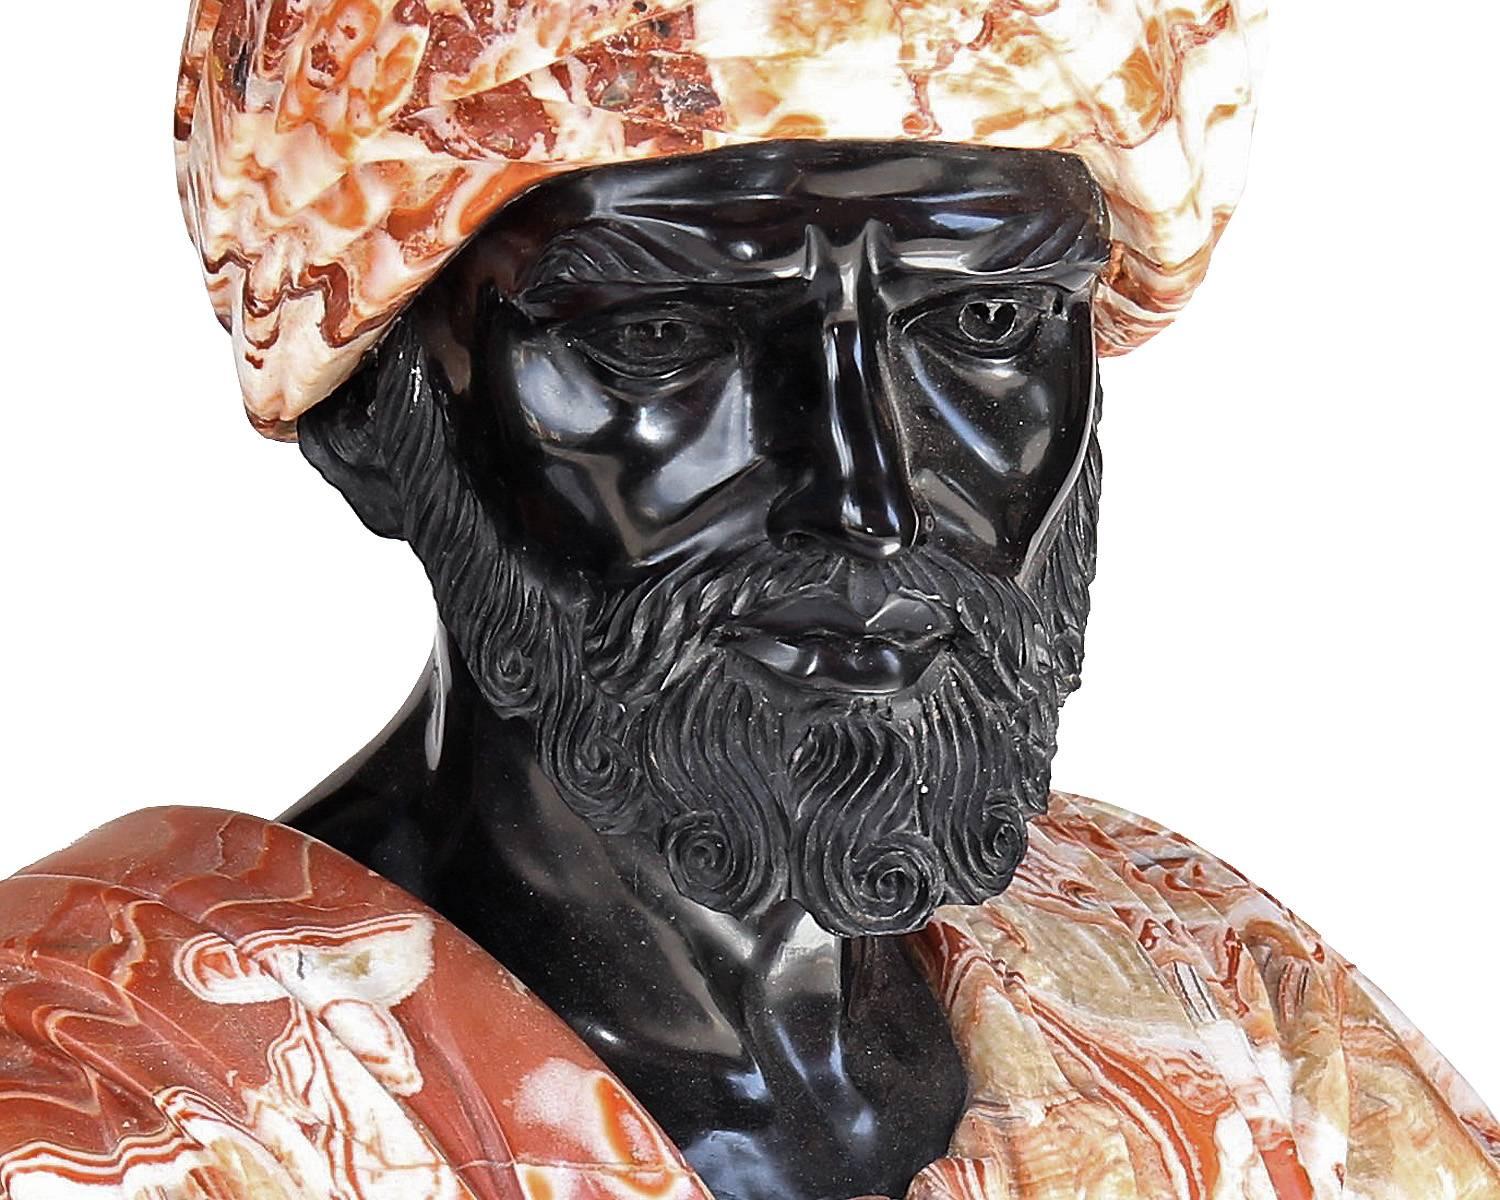 This exquisitely carved marble bust depicts a bearded man in the Orientalist style wearing both a beautiful robe and matching turban. This piece makes a big statement in terms of size, style and craftsmanship. Please notice the gorgeous details of